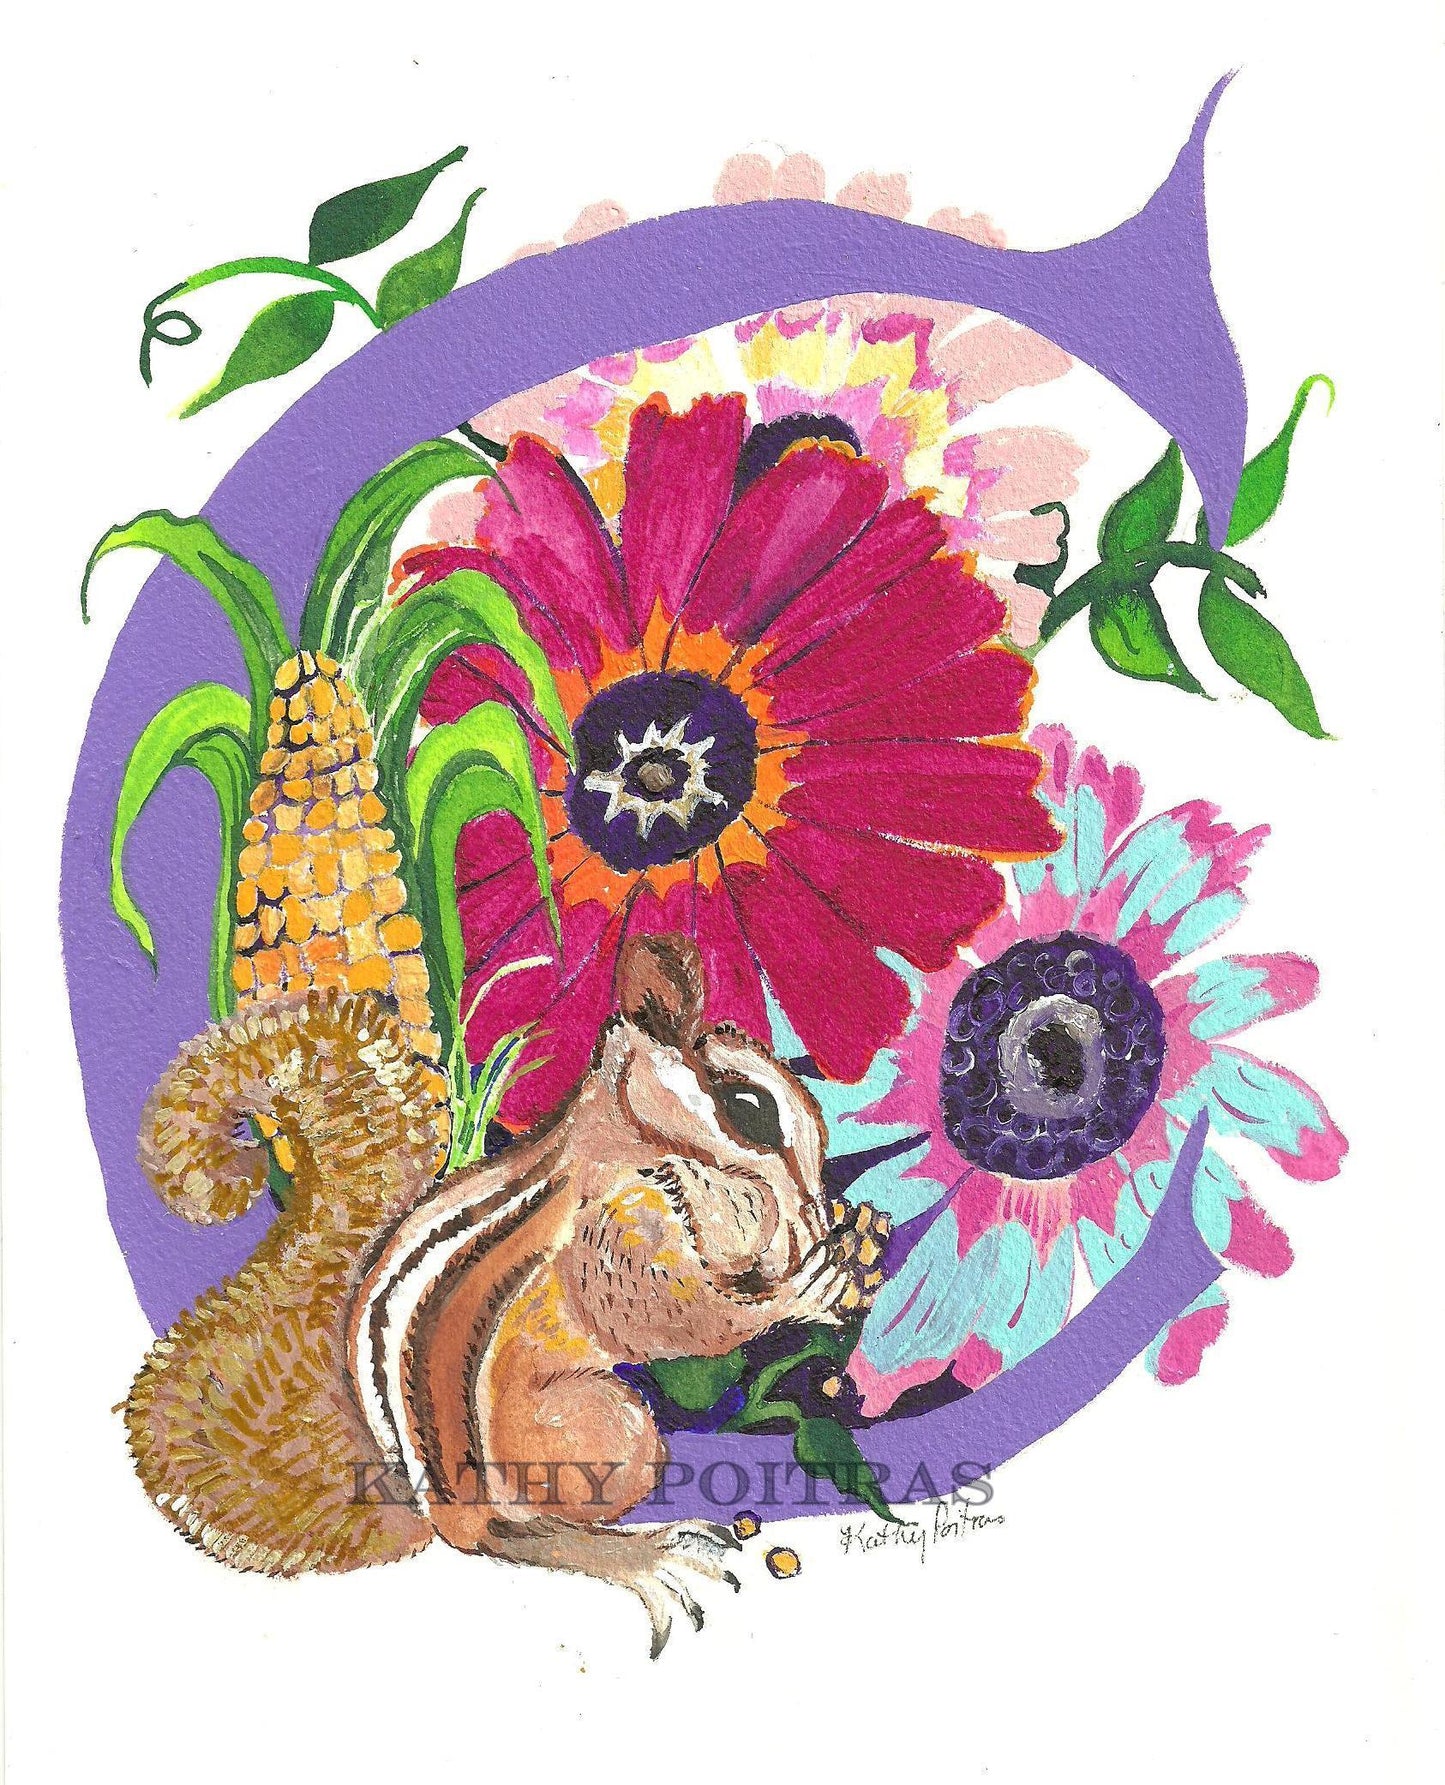 Illustrated letter C, for Chipmunk and Chrysanthemum and Corn. Art fr the nursery of children's bedroom.   by artist Kathy Poitras